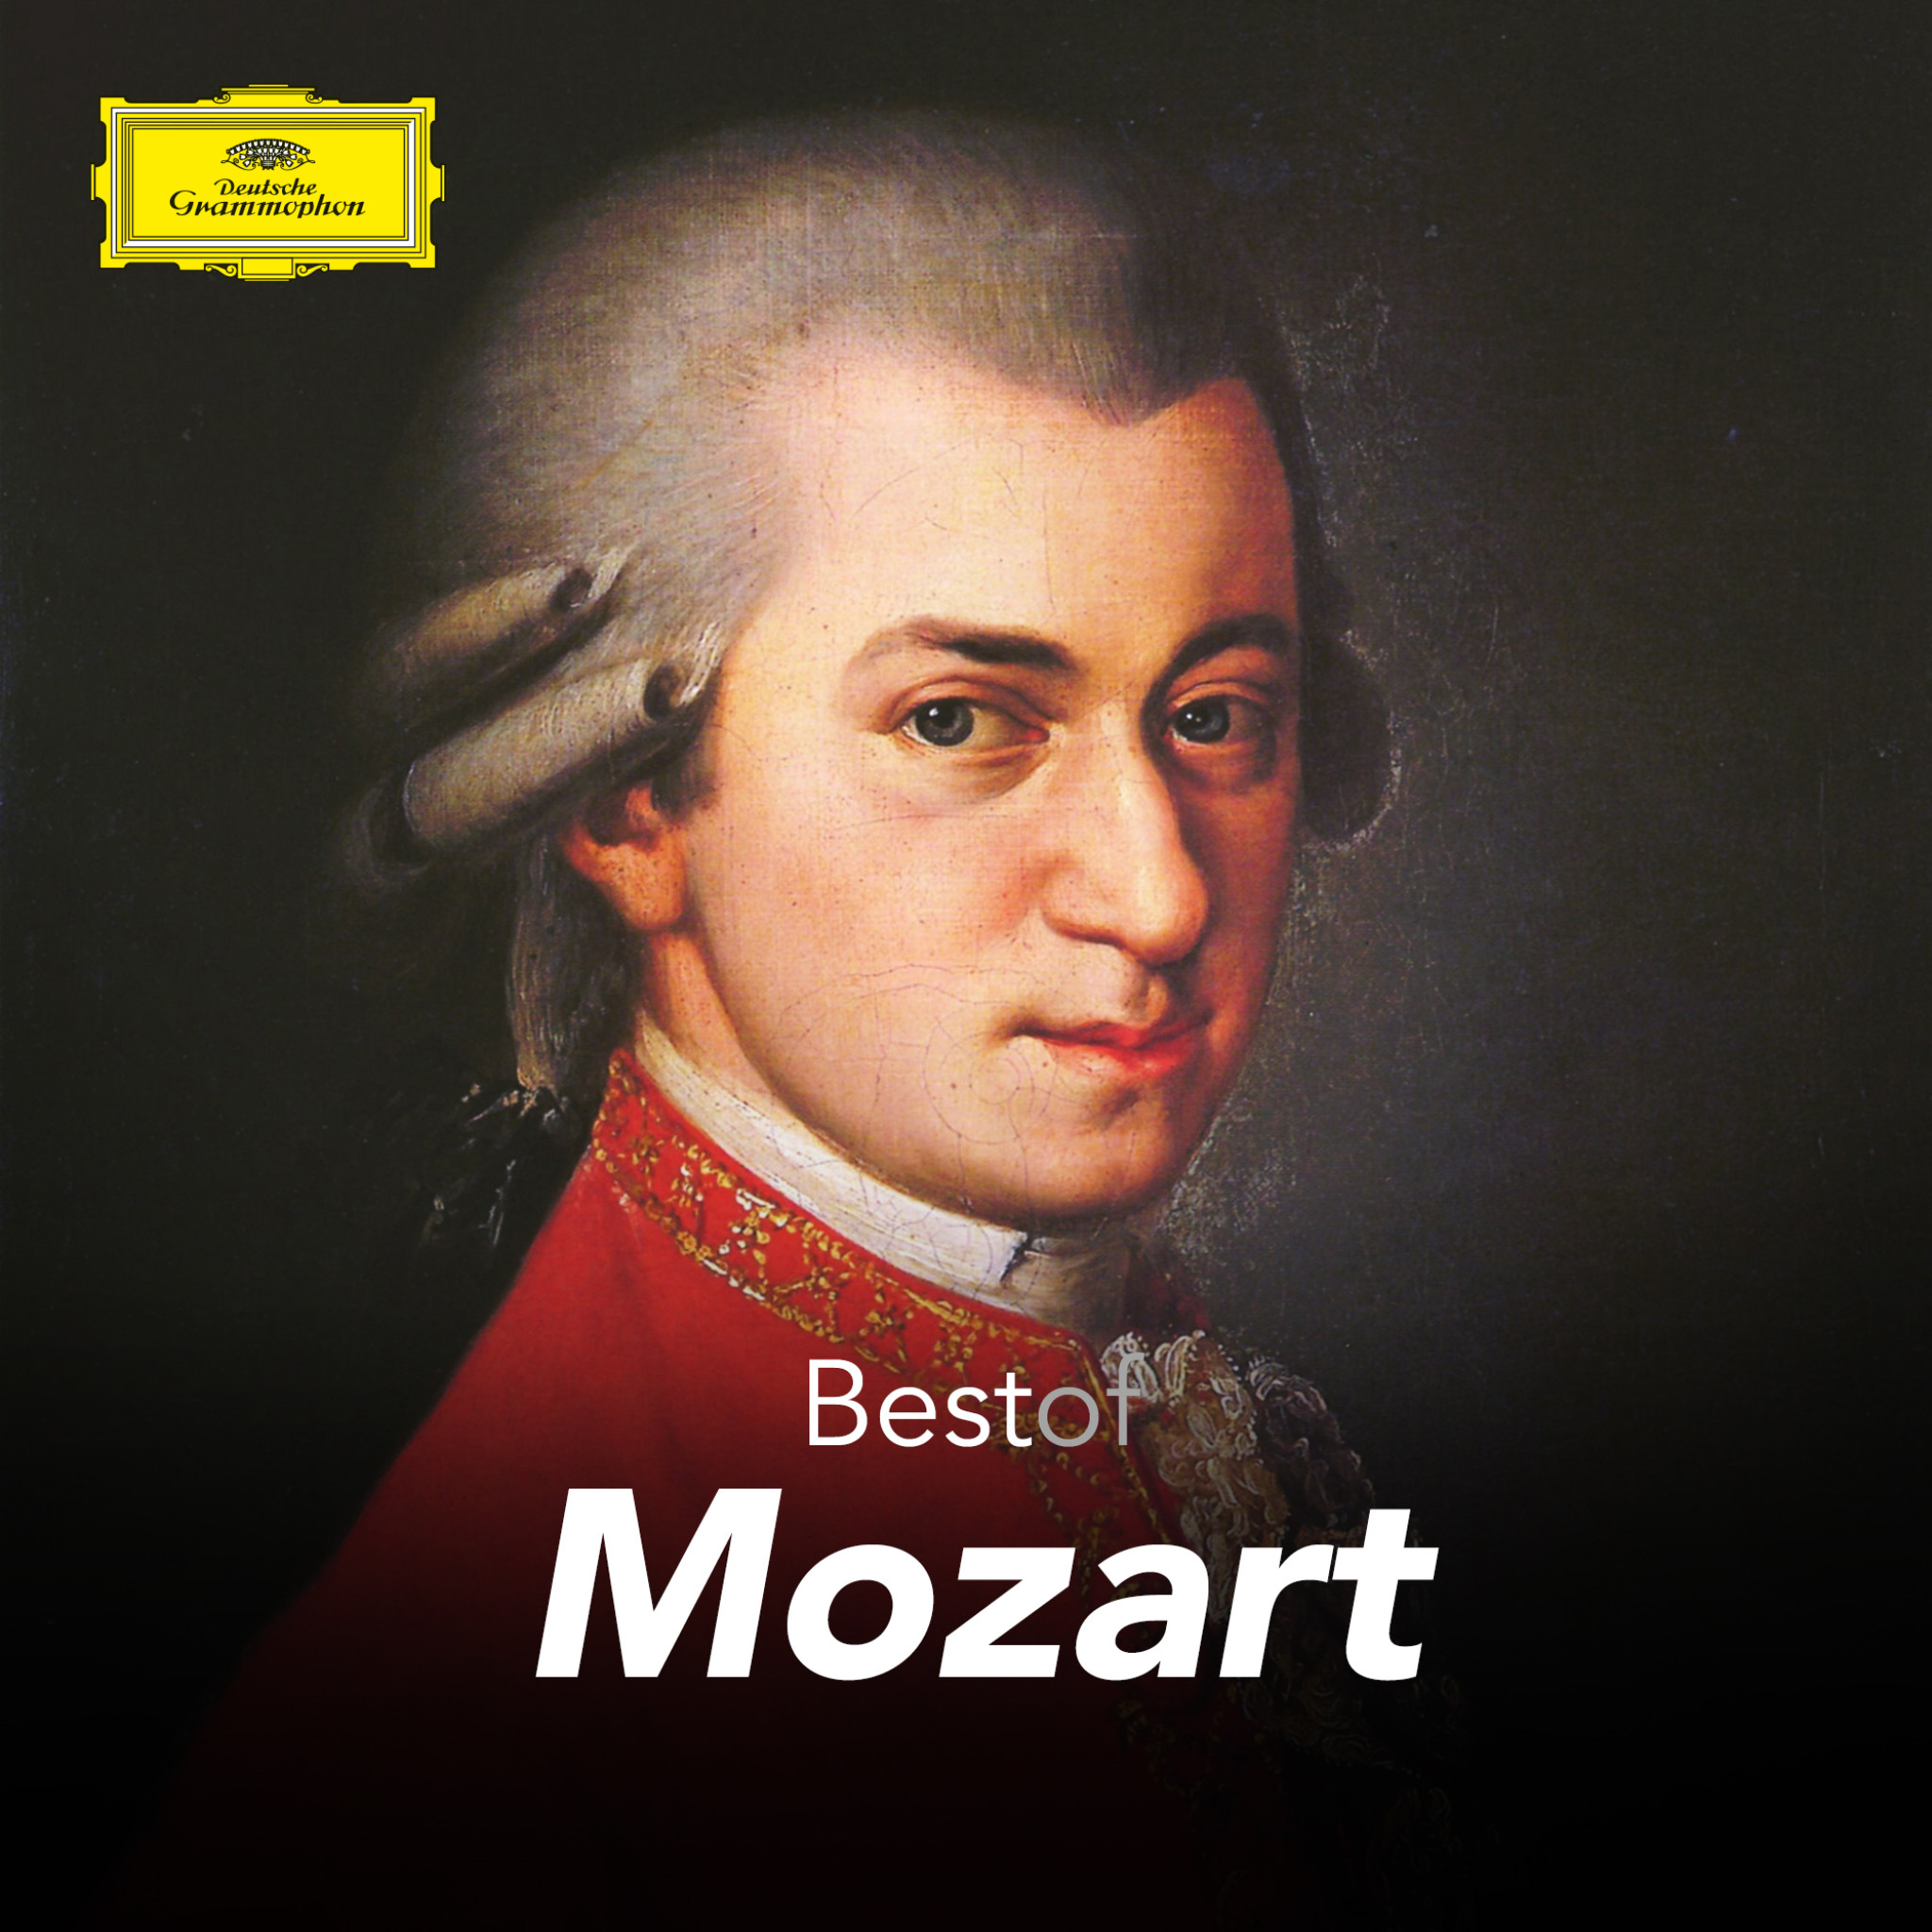 Mozart - Best of Playlist Cover